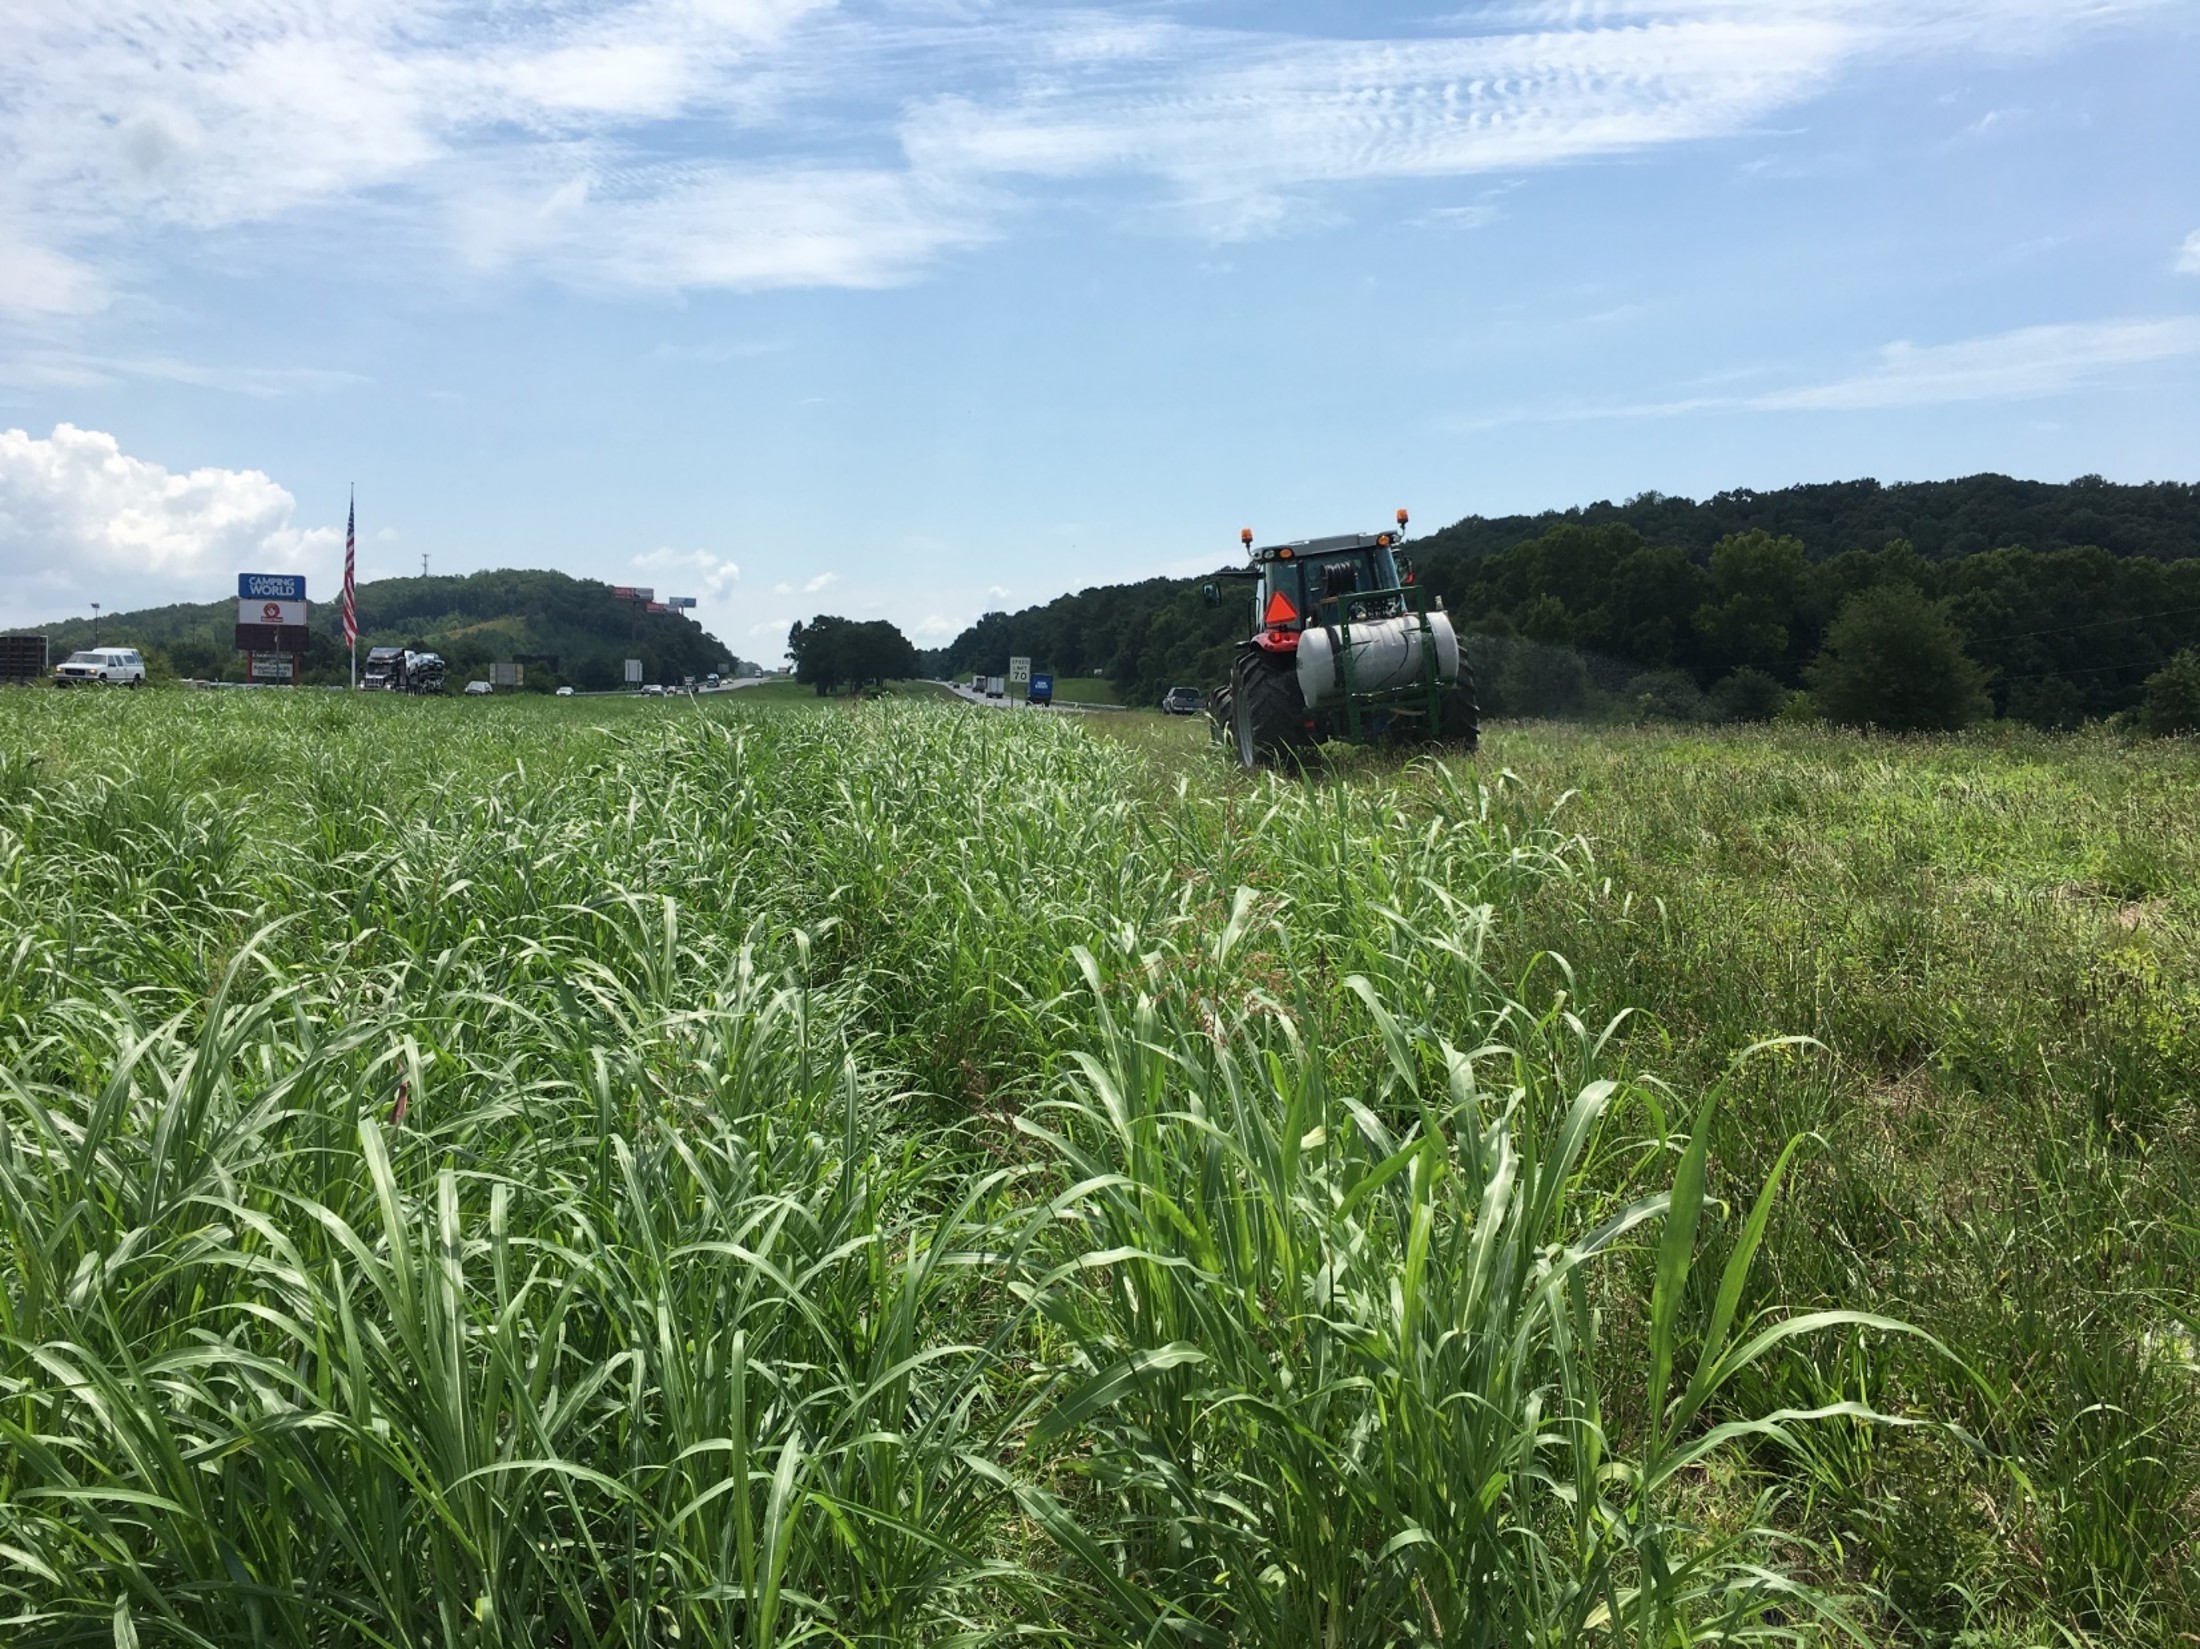 This is a picture of a tractor spraying a field of tall grass. The tractor appears to be equipped with a large tank and sprayer, likely applying herbicide or pesticide to the vegetation.